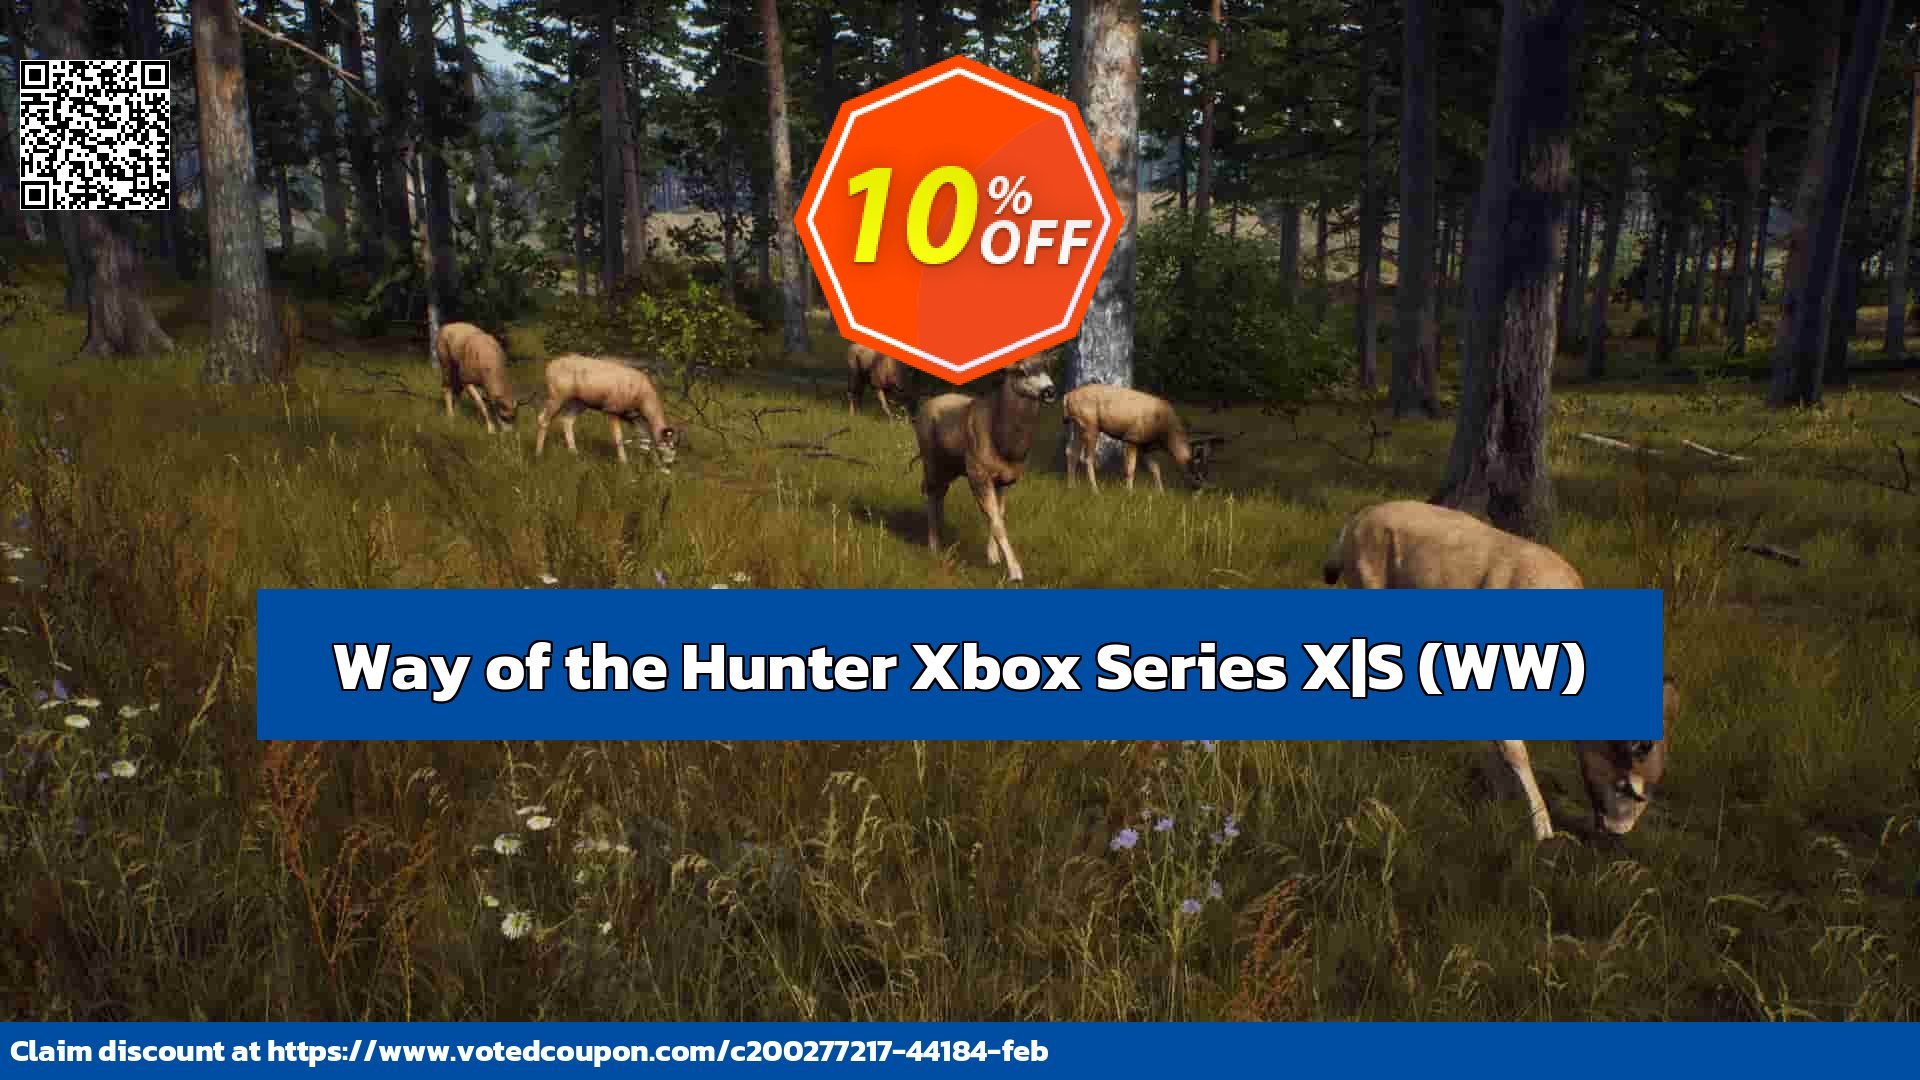 Way of the Hunter Xbox Series X|S, WW  voted-on promotion codes